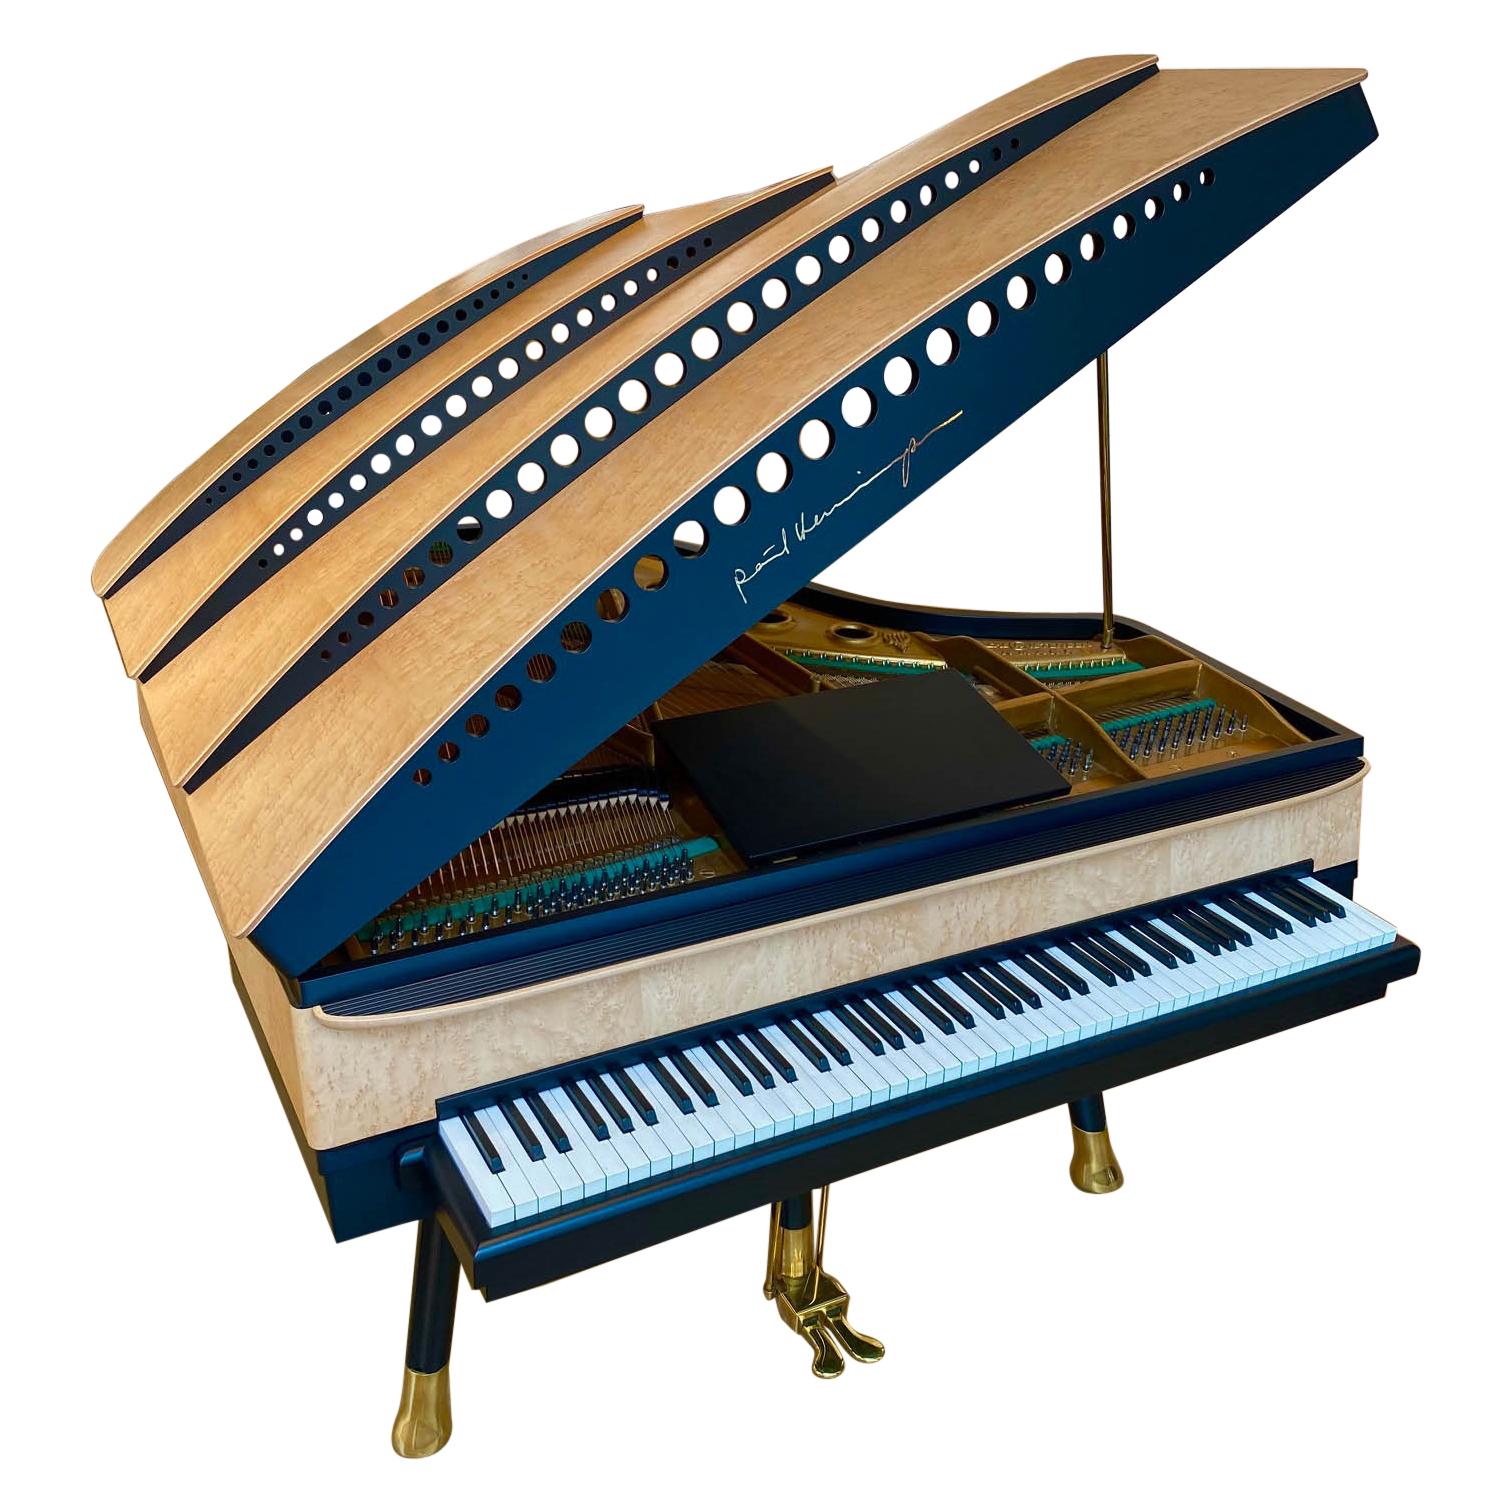 PH Bow Grand Piano, Maple Birch with Brass Details, Modern, Sculptural